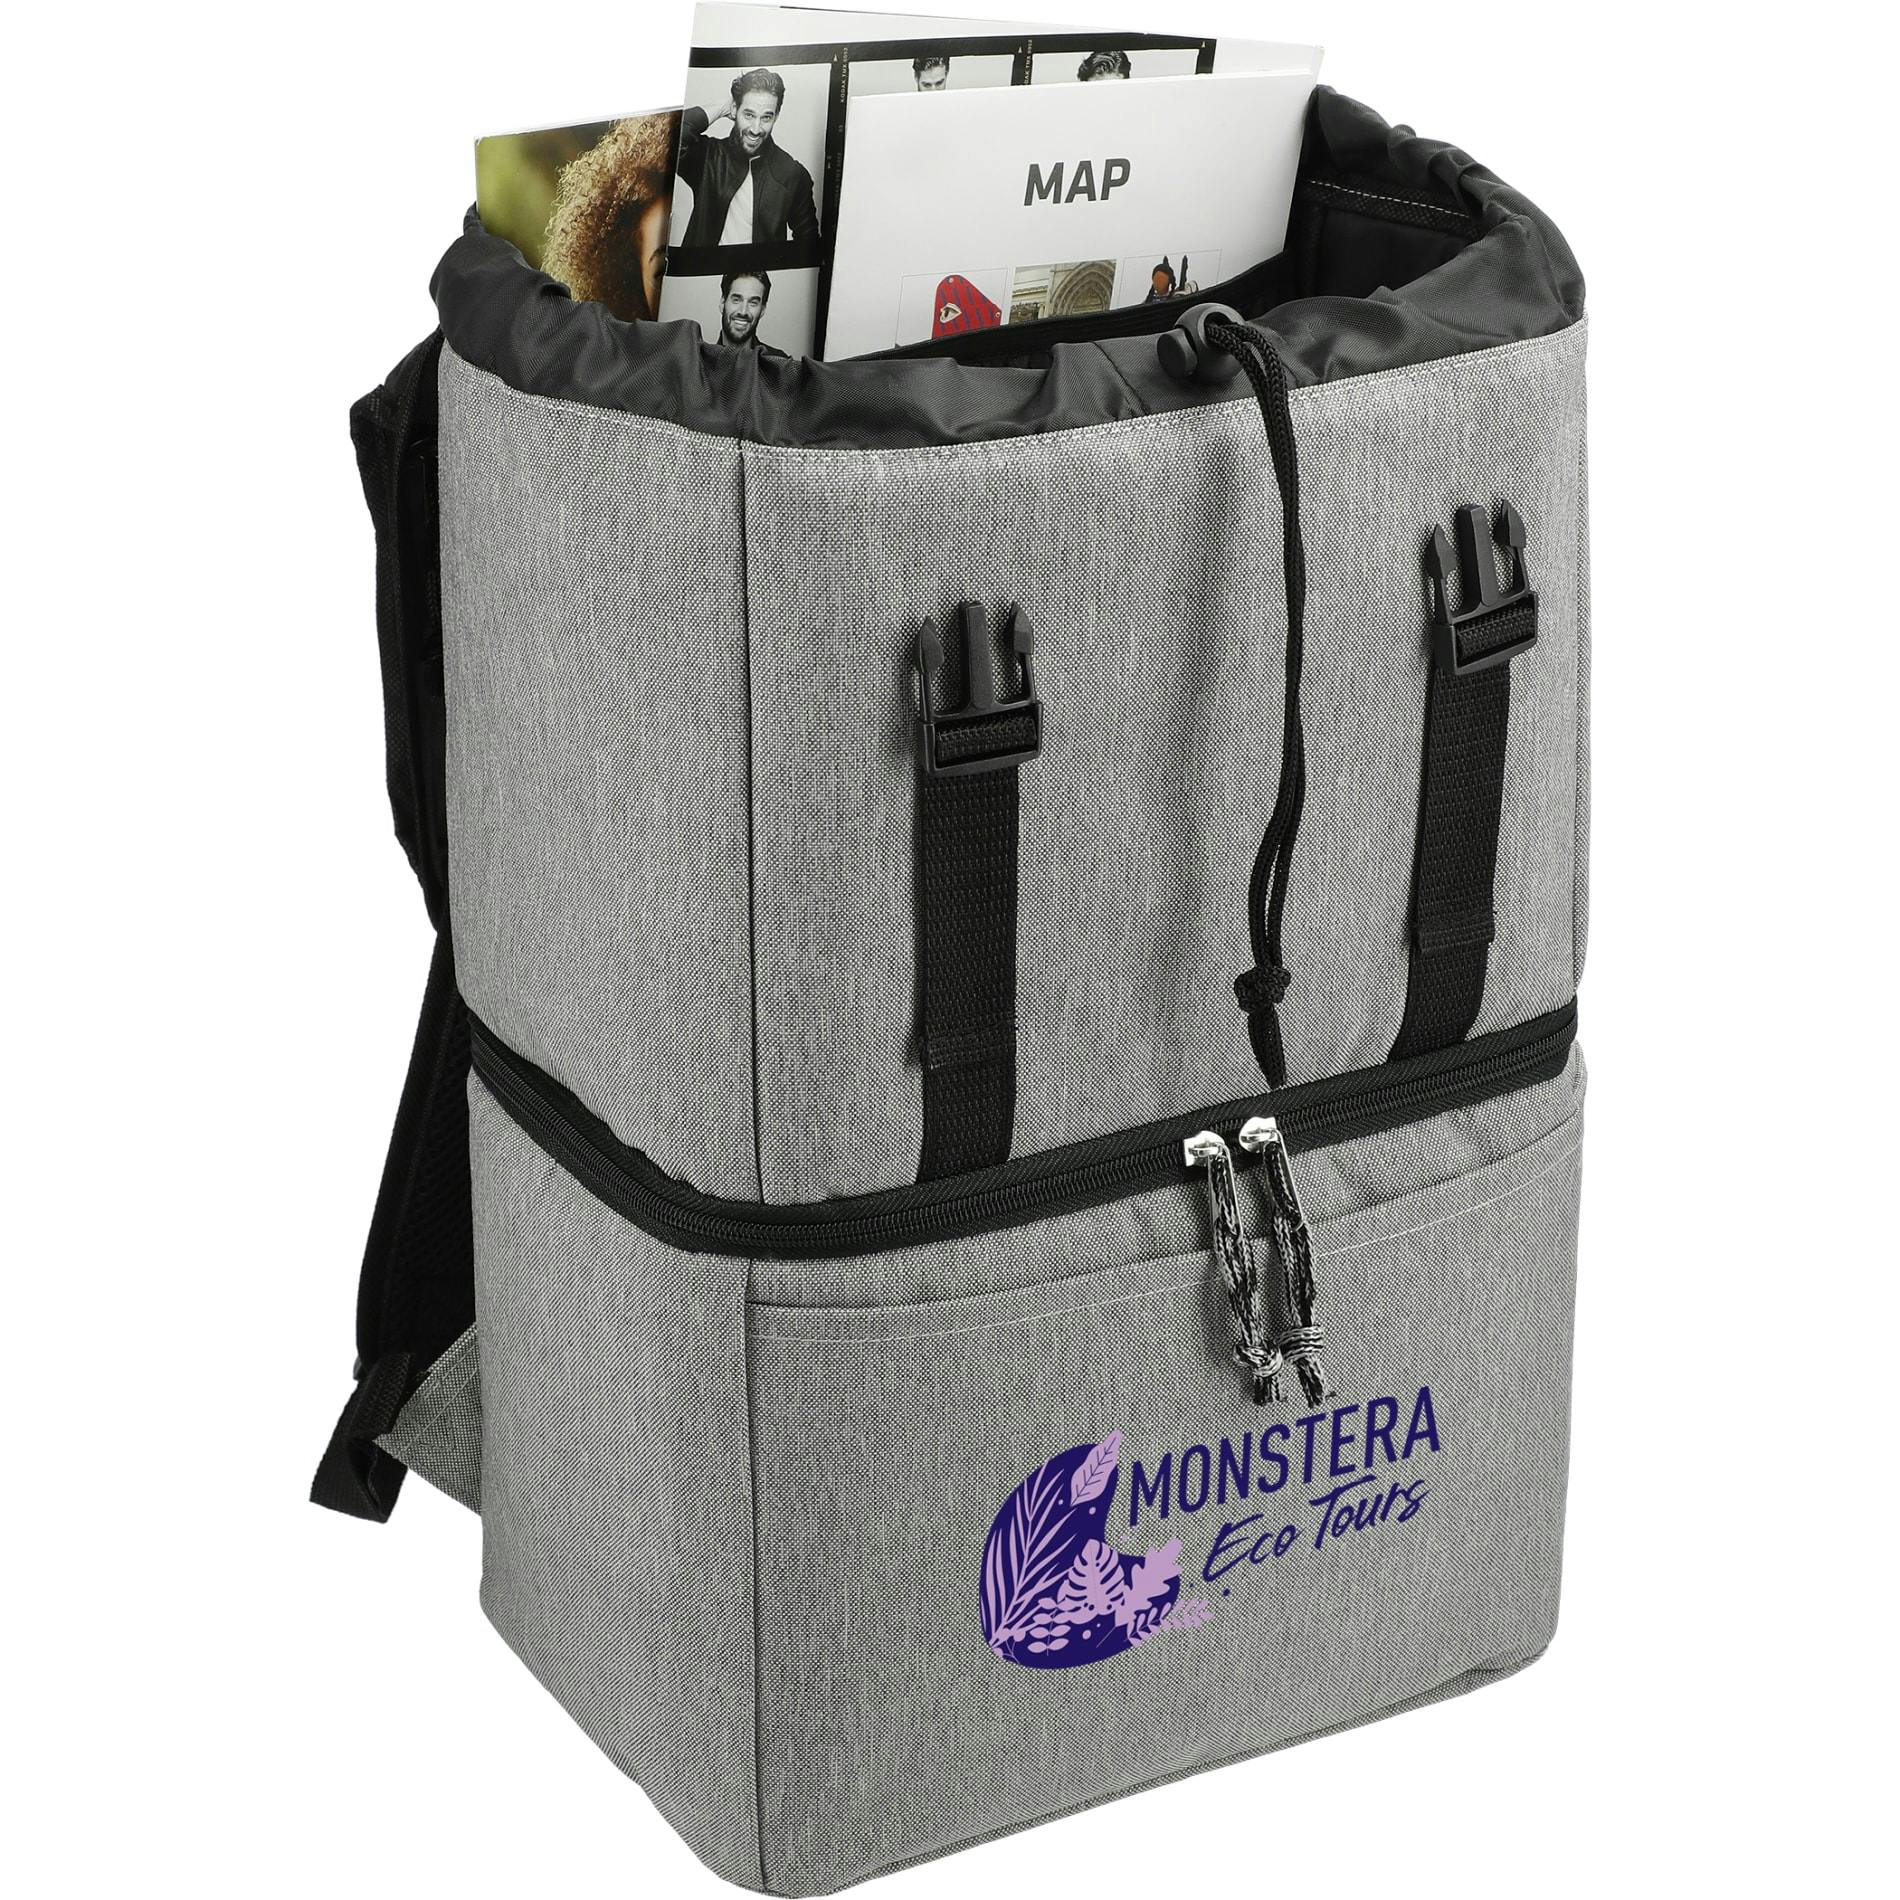 Merchant & Craft Revive Recycled Backpack Cooler - additional Image 2